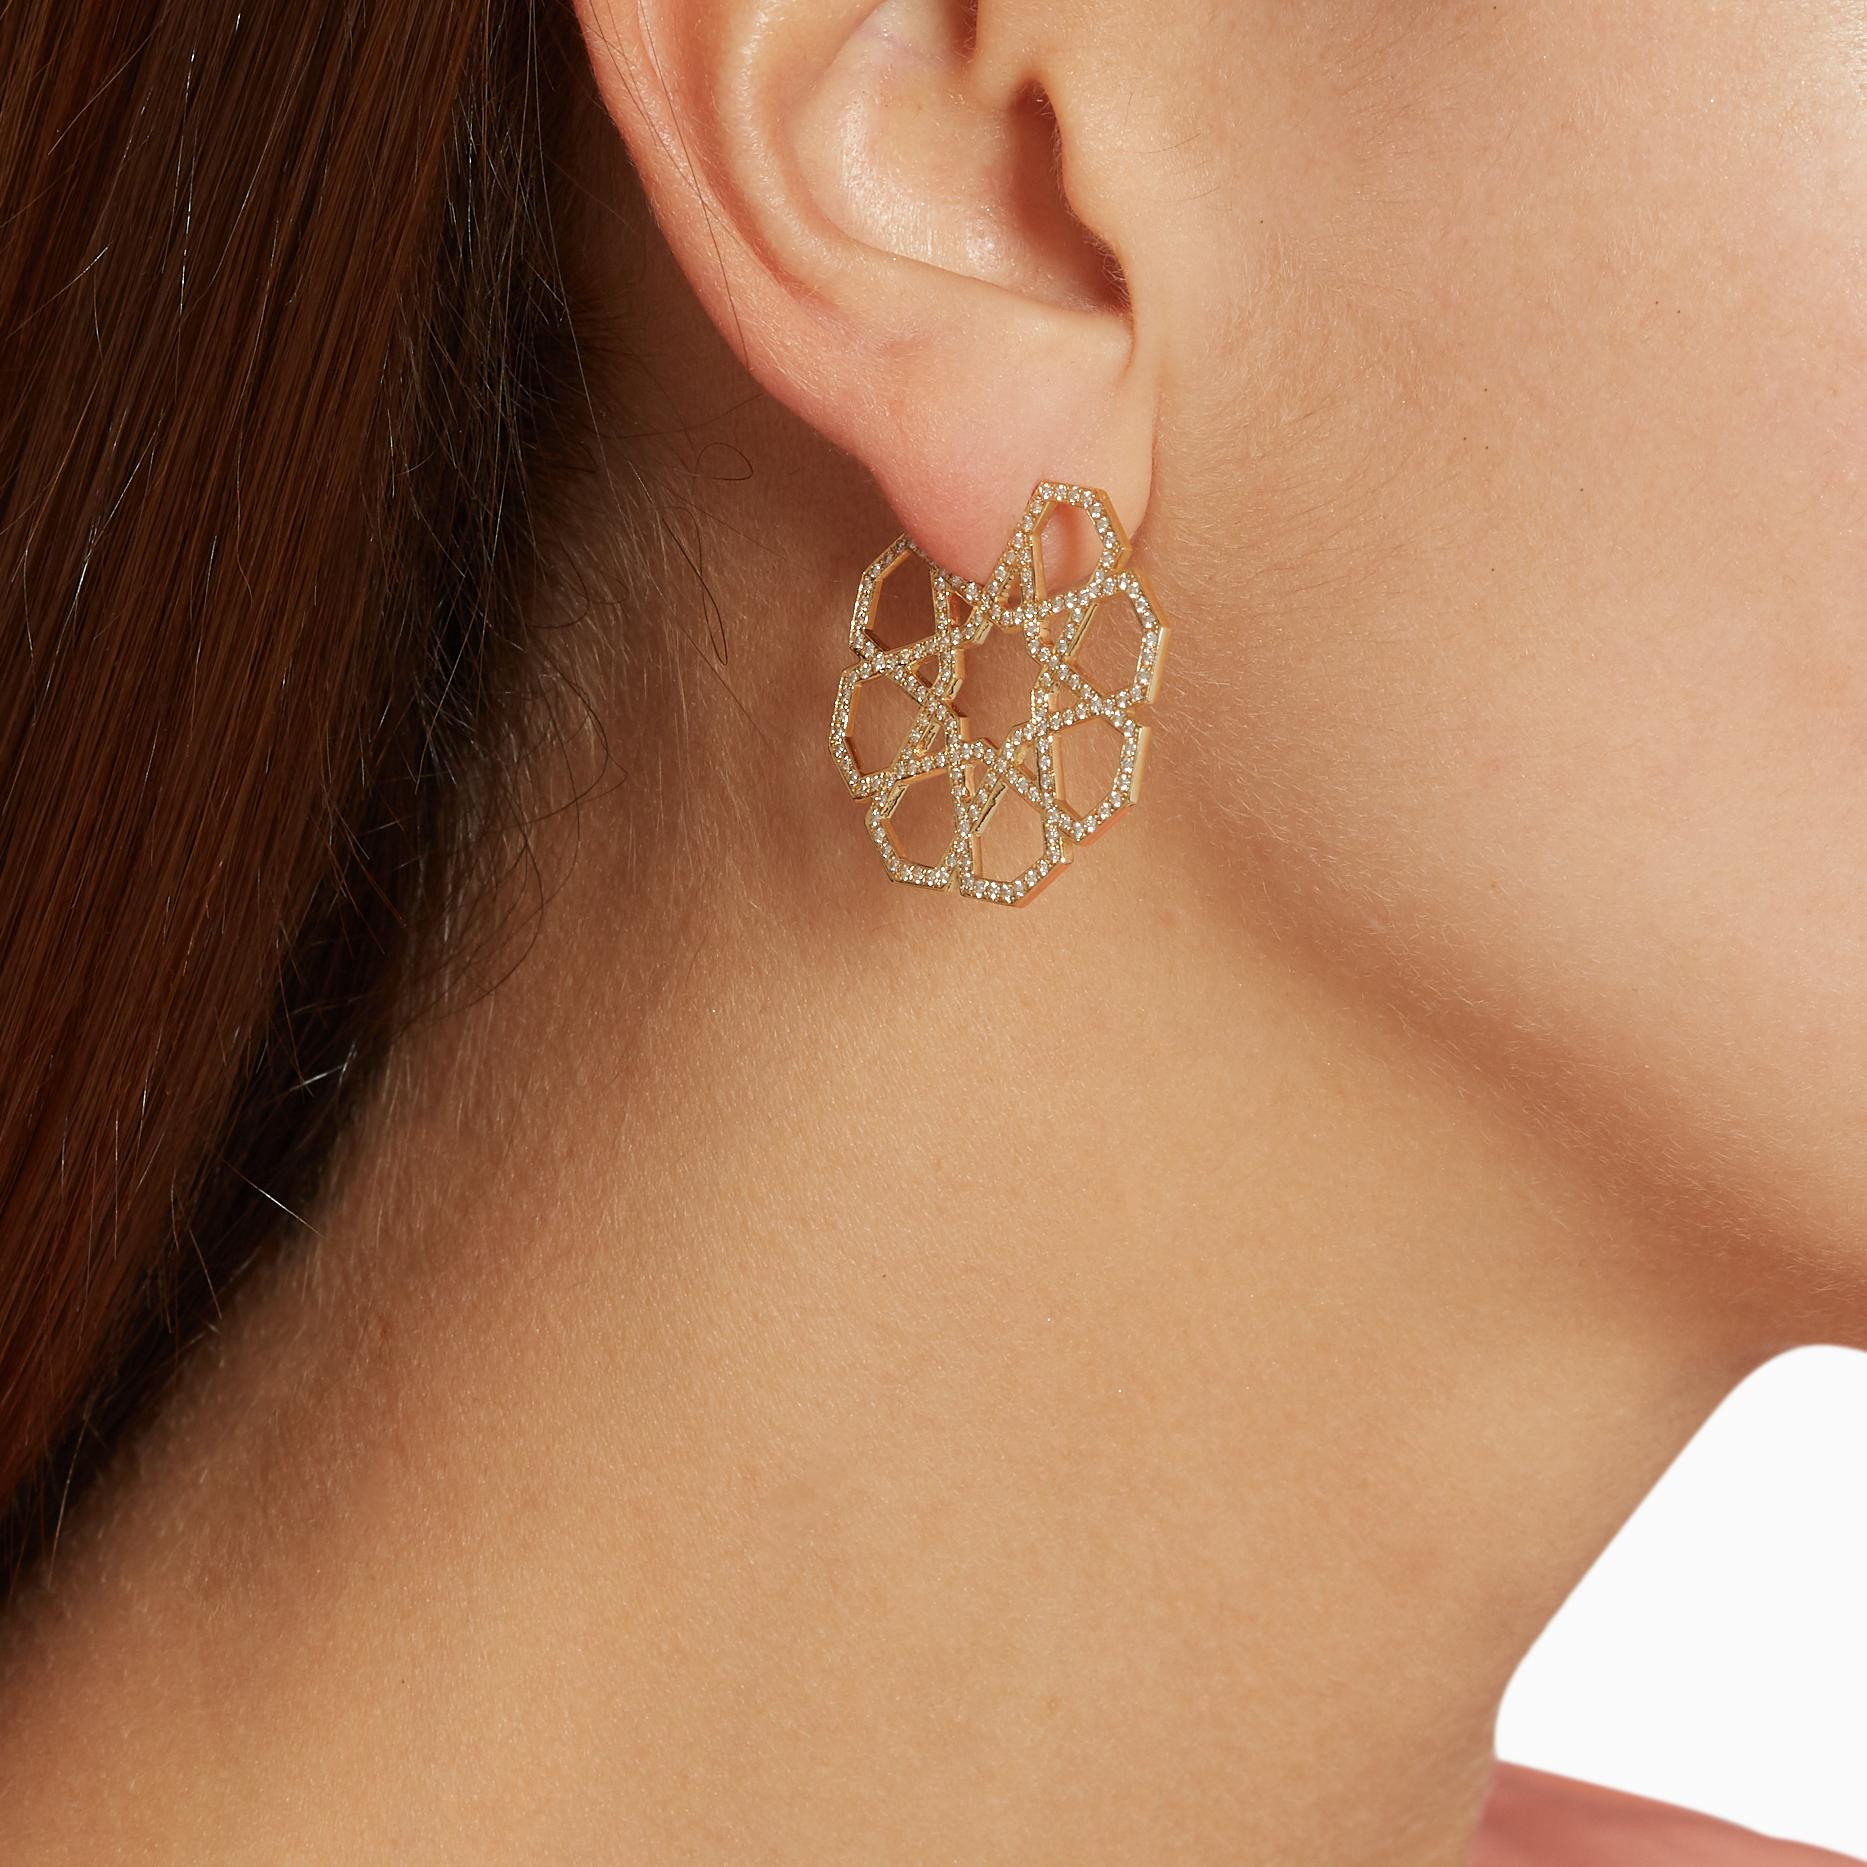 18kt yellow gold hoops with diamonds from Ralph Masri's Arabesque Deco collection, inspired by Middle Eastern patterns and motifs infused with an Art Deco touch.

Available in yellow, rose or white gold.

Push backs for pierced ears.